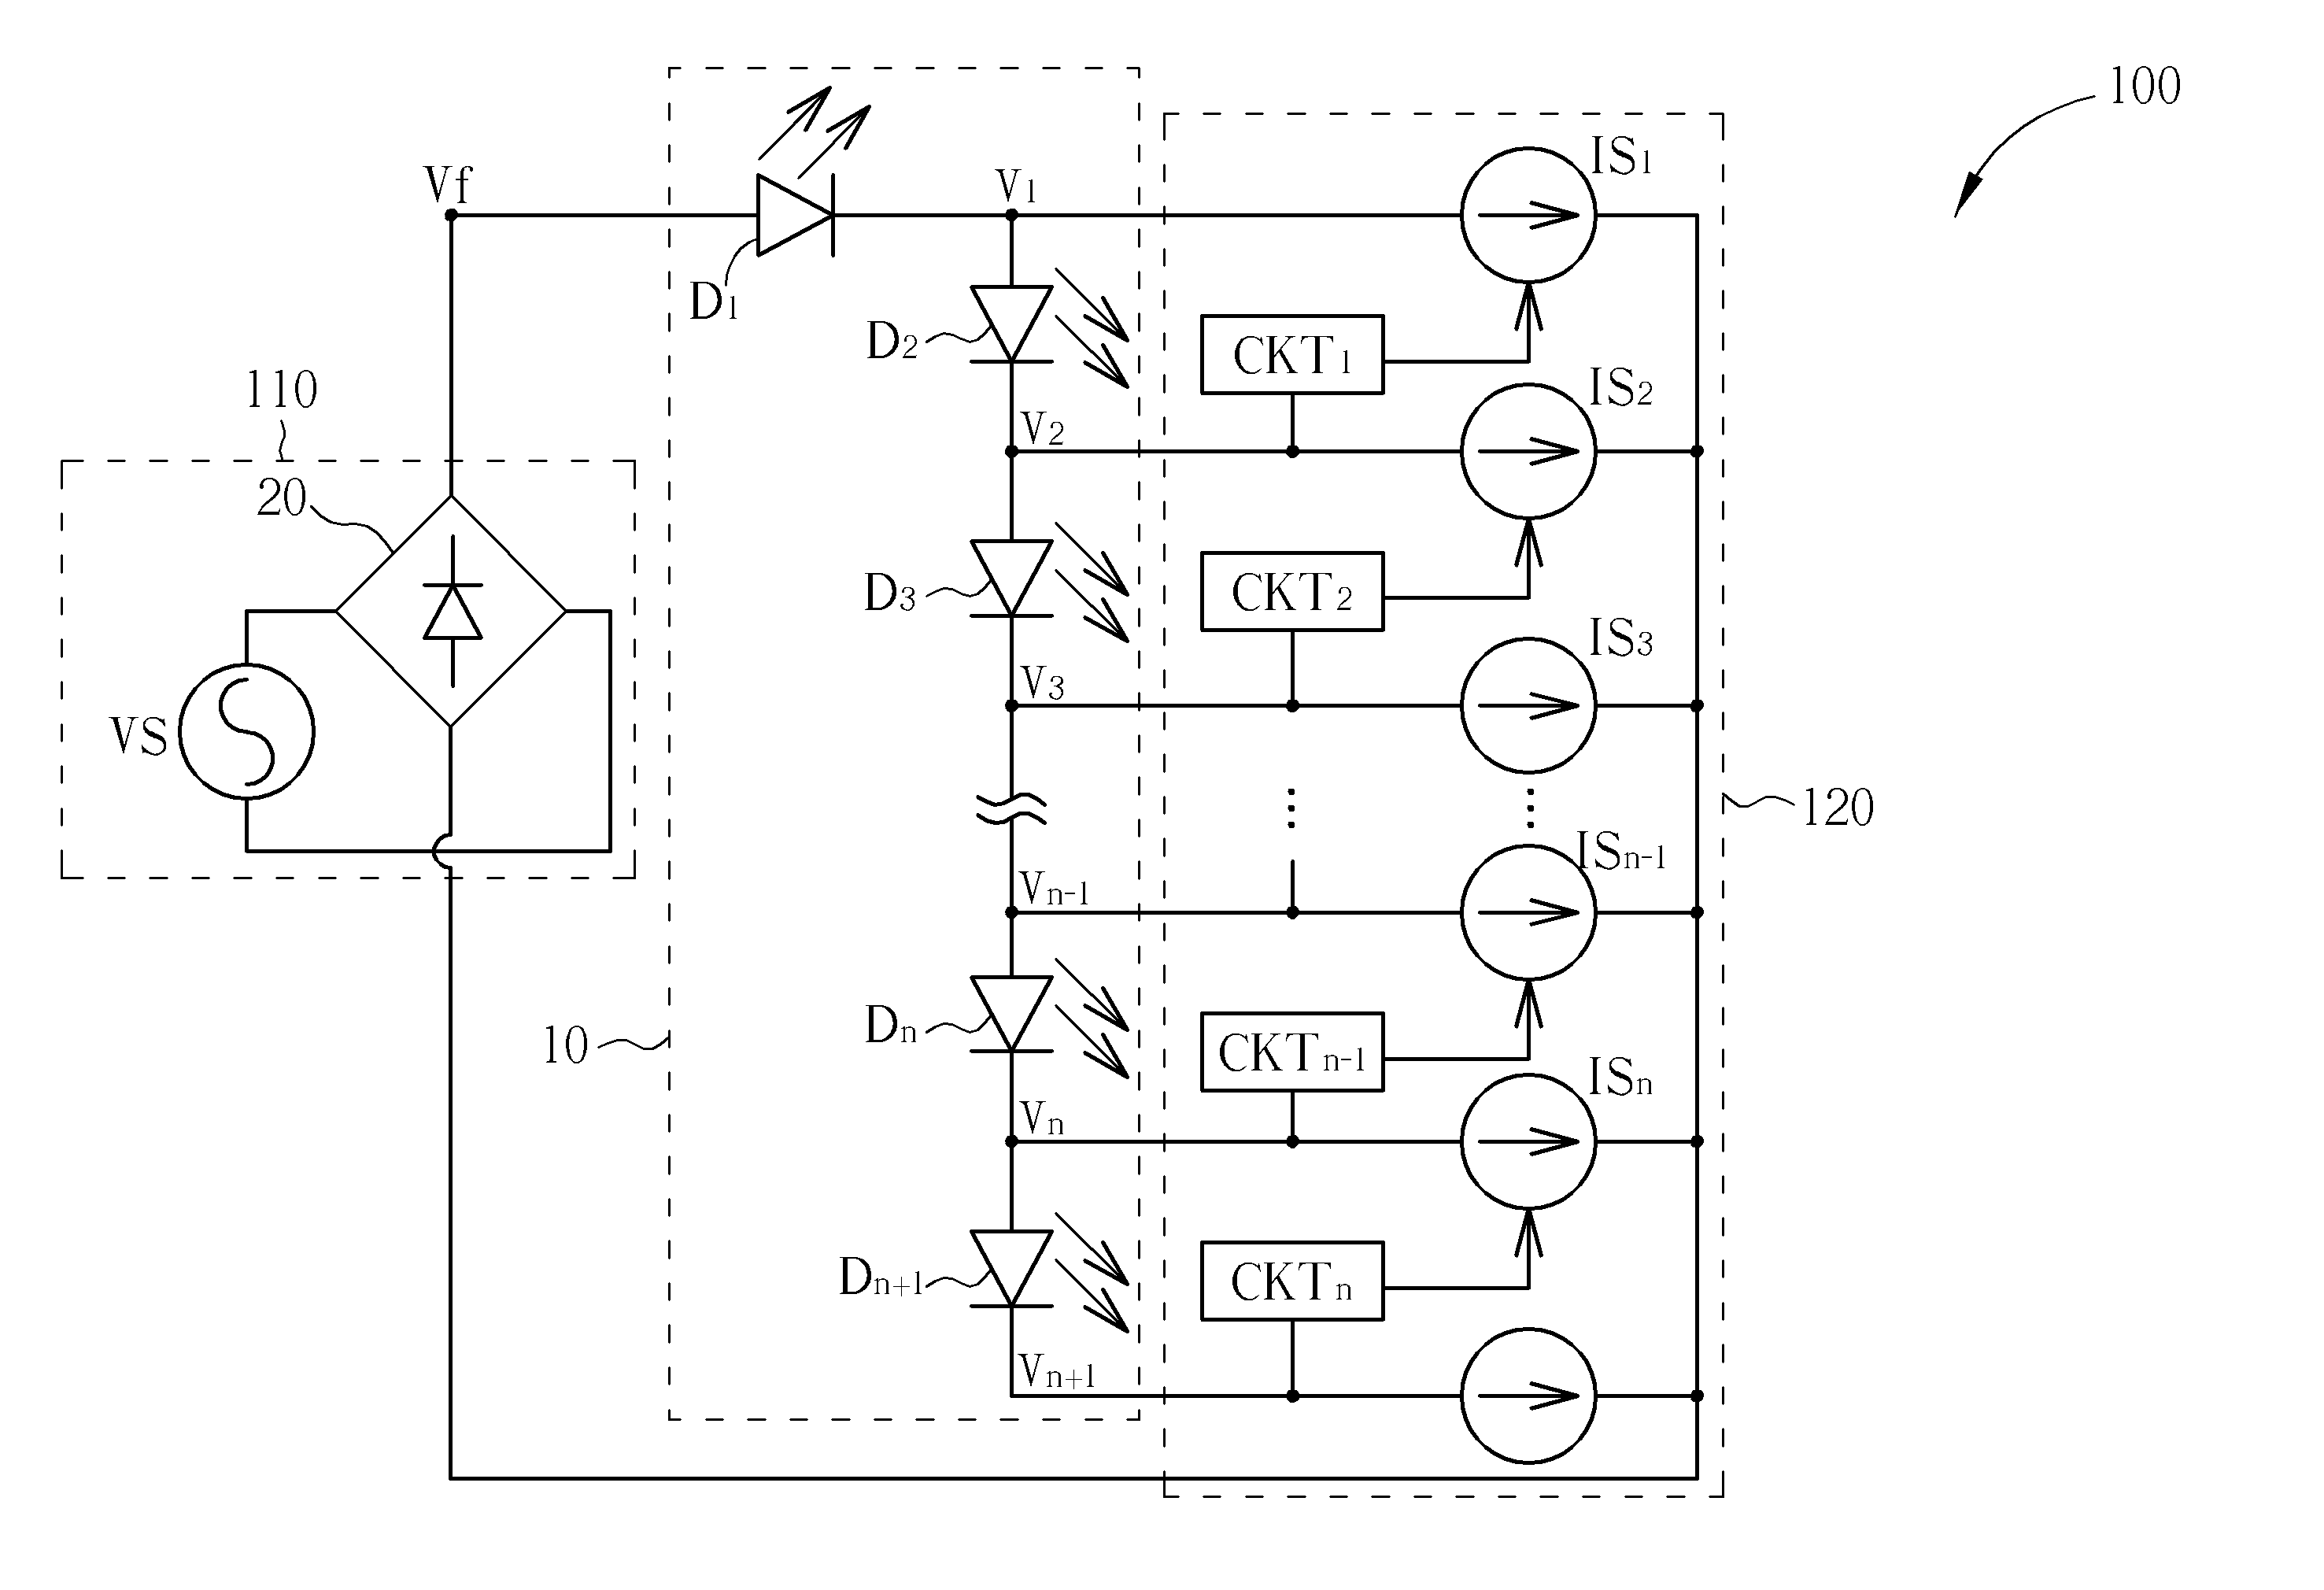 LED driving circuit having a large operational range in voltage